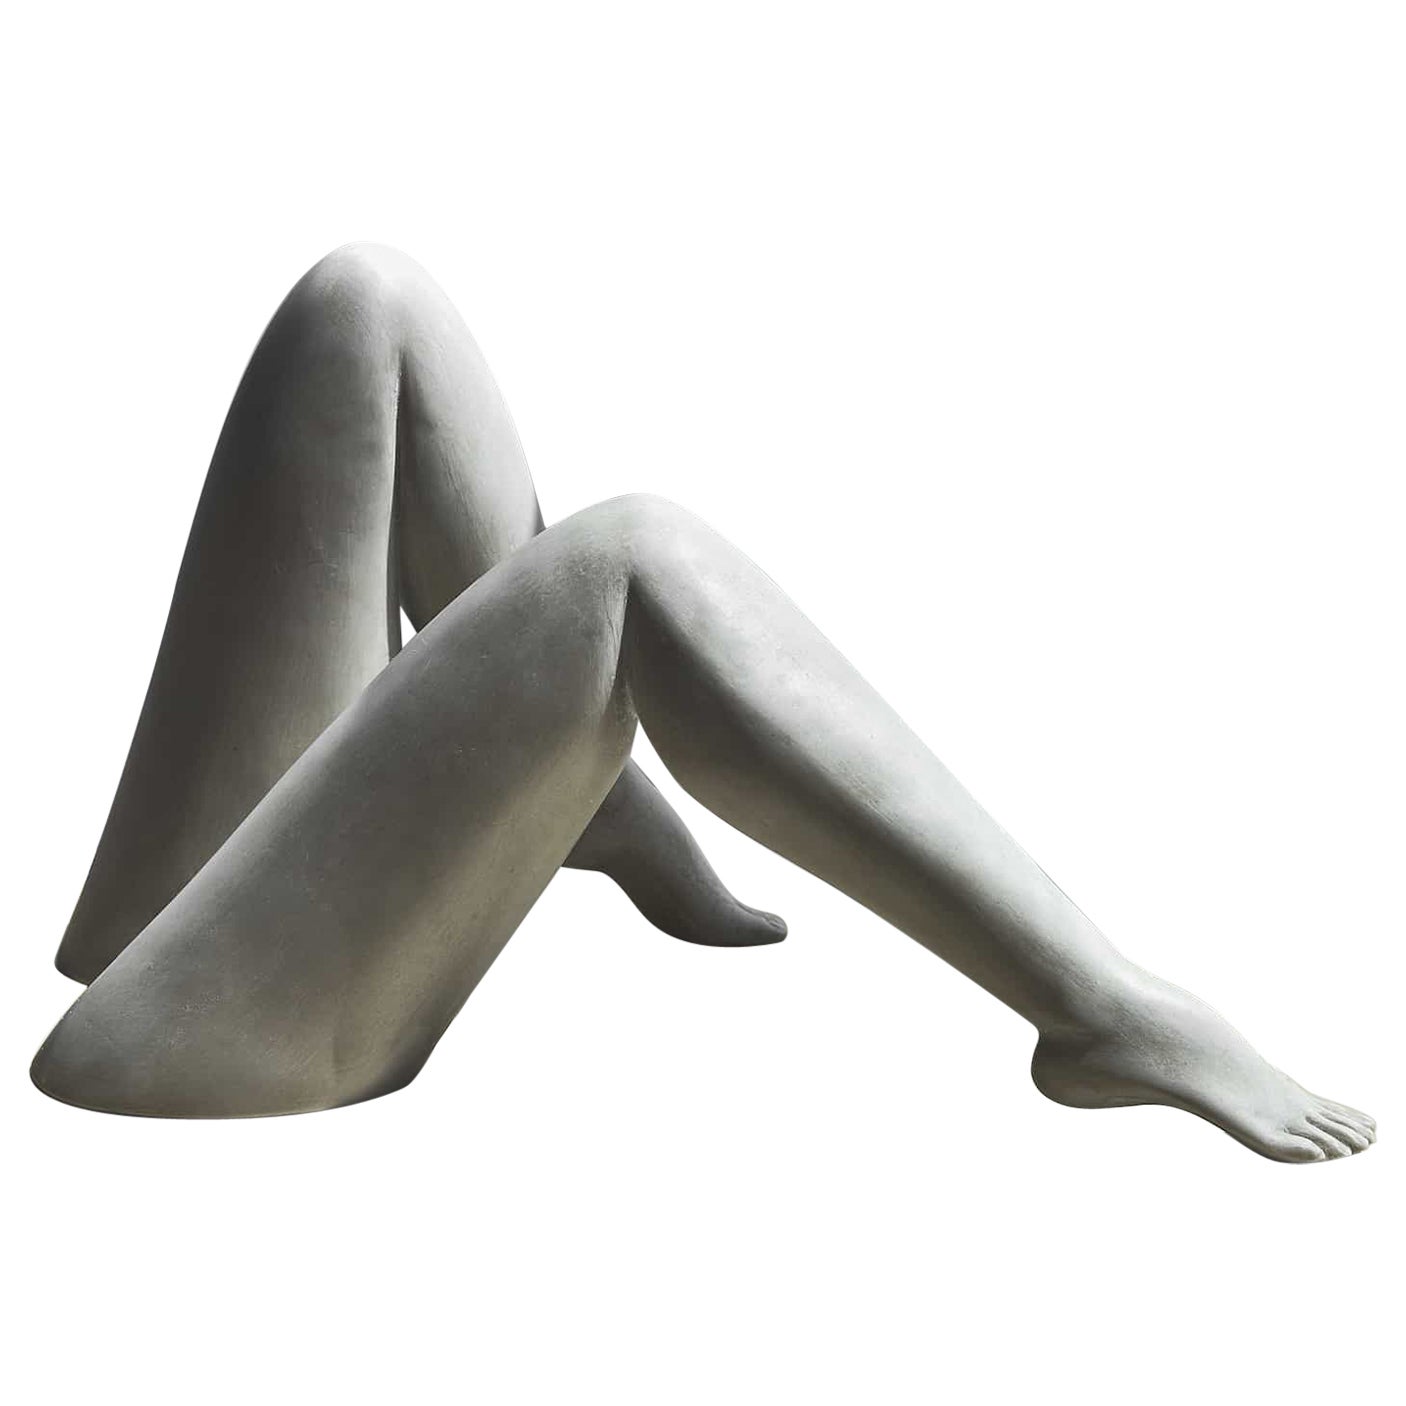 Le Gambe Sculpture by Marcela Cure